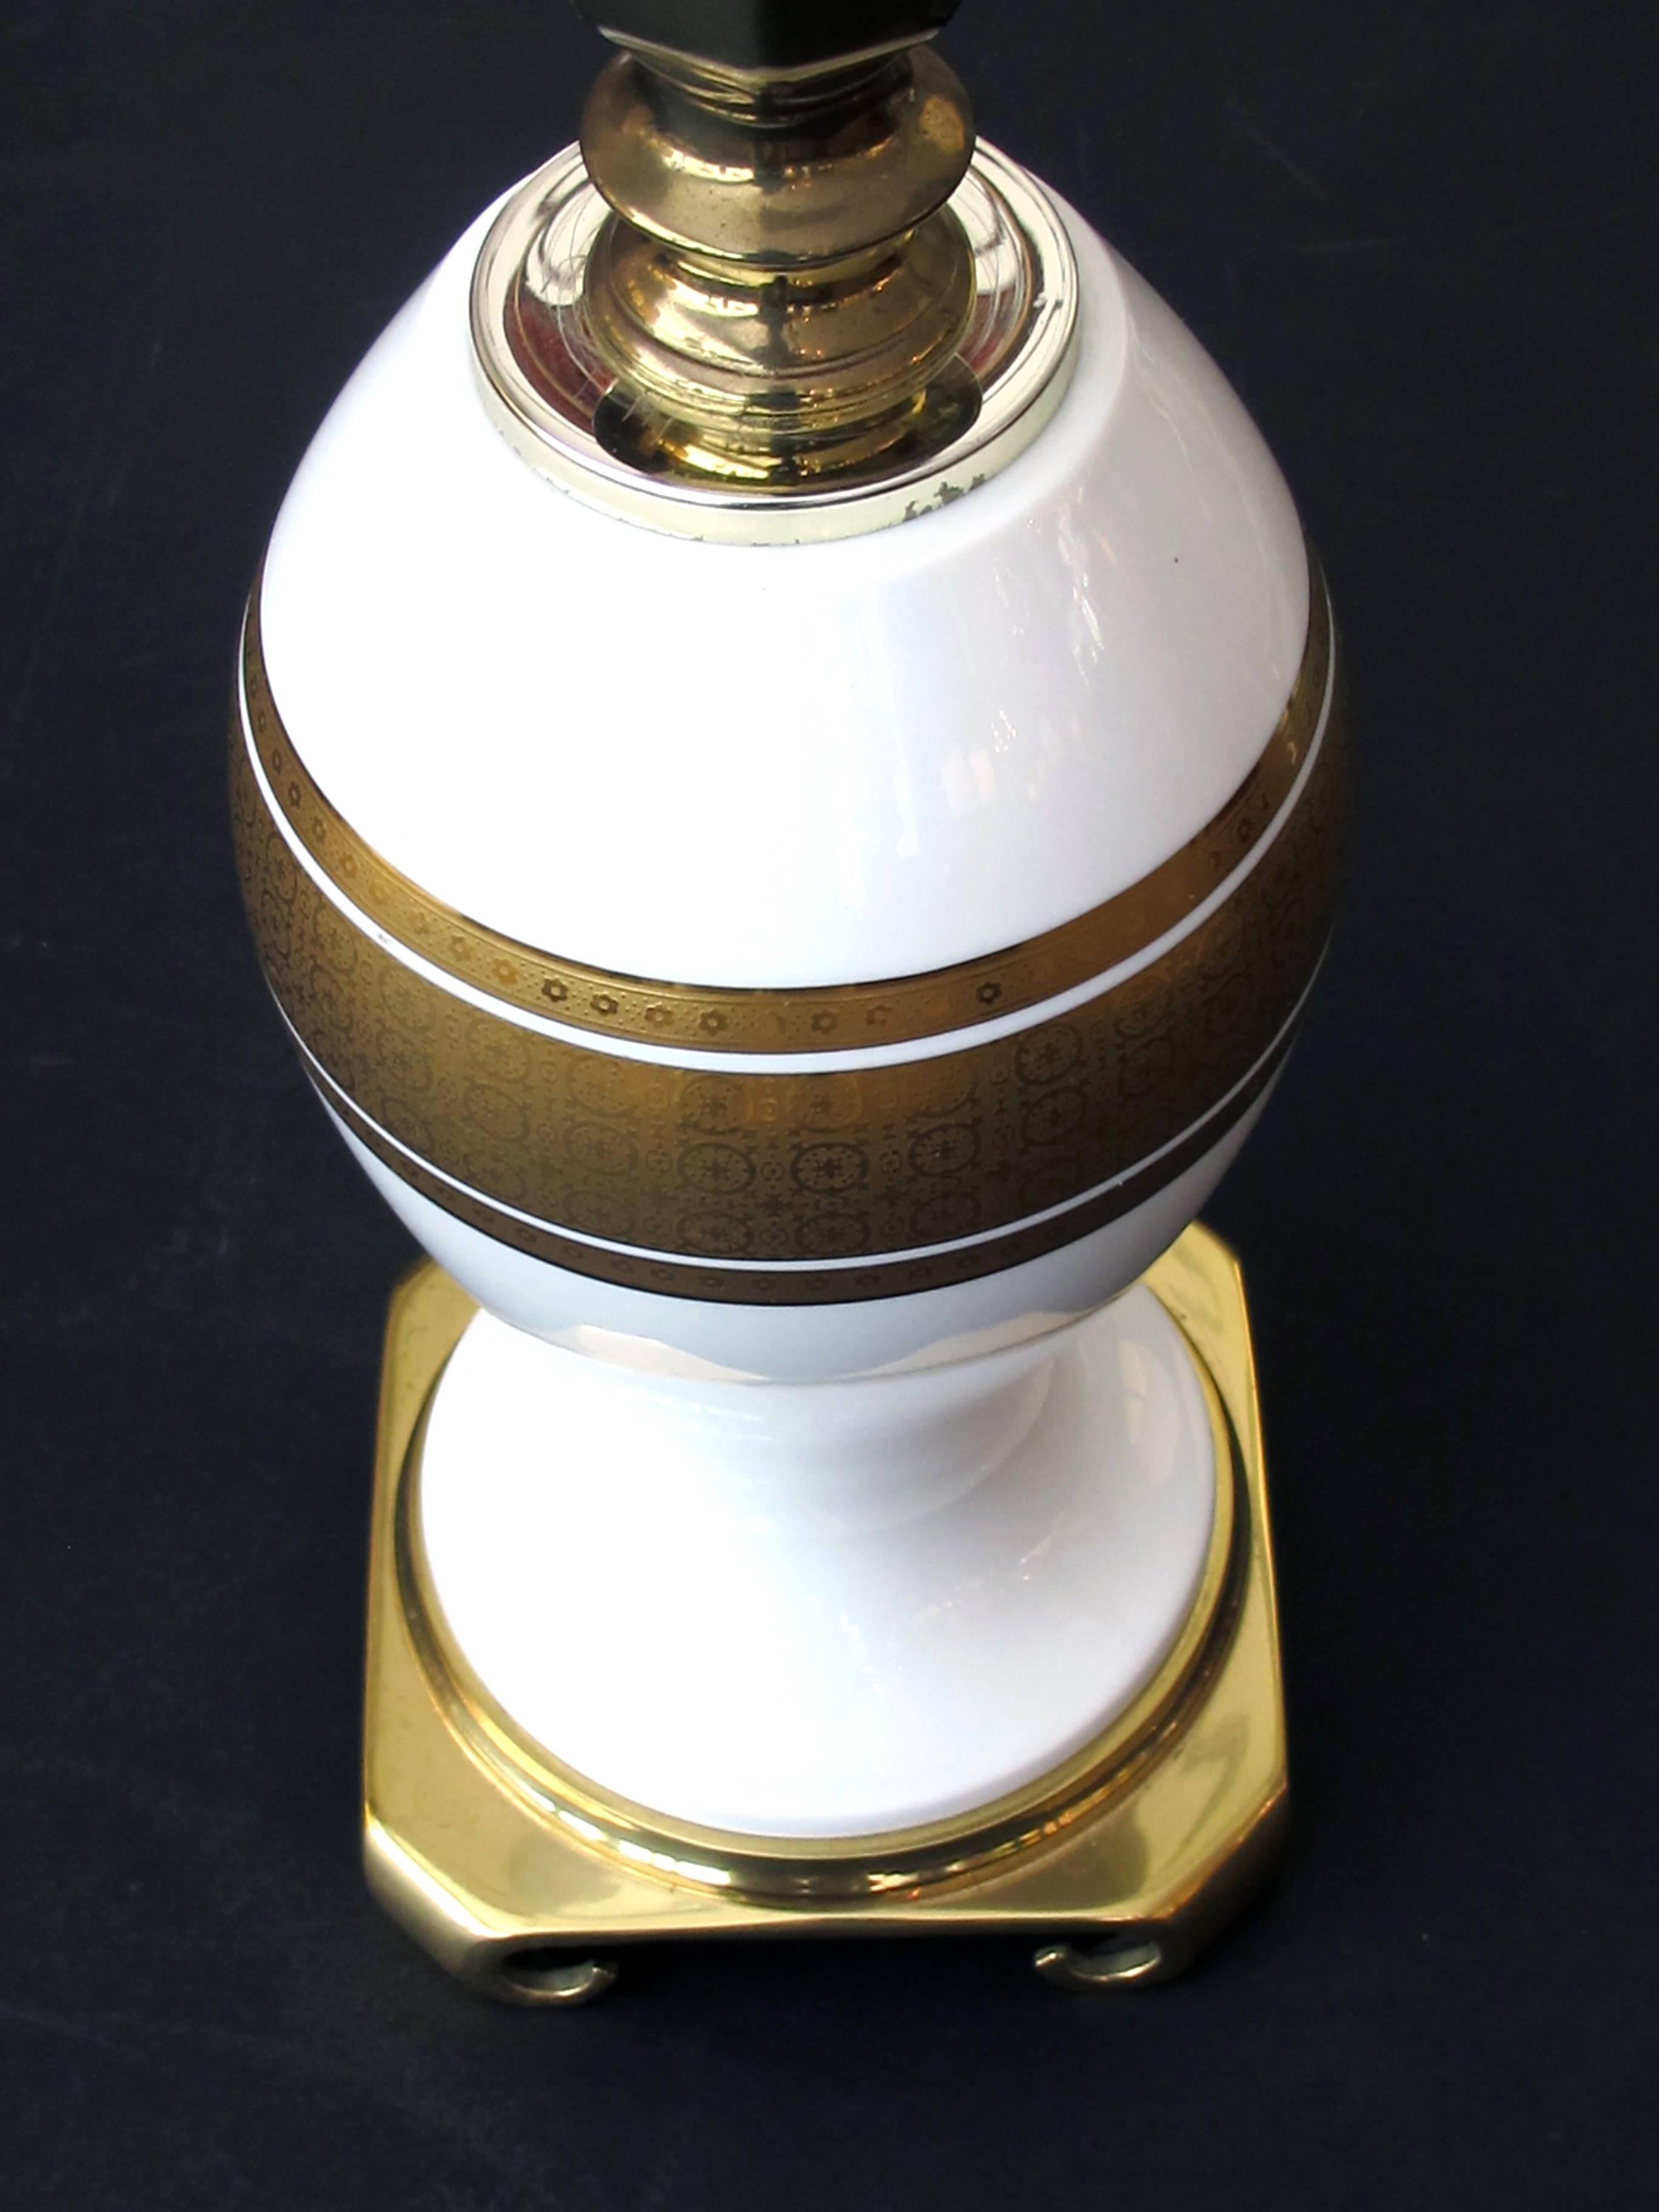 Each bulbous urn with gilt perimeter bands with raised decoration on a luminous white ground.